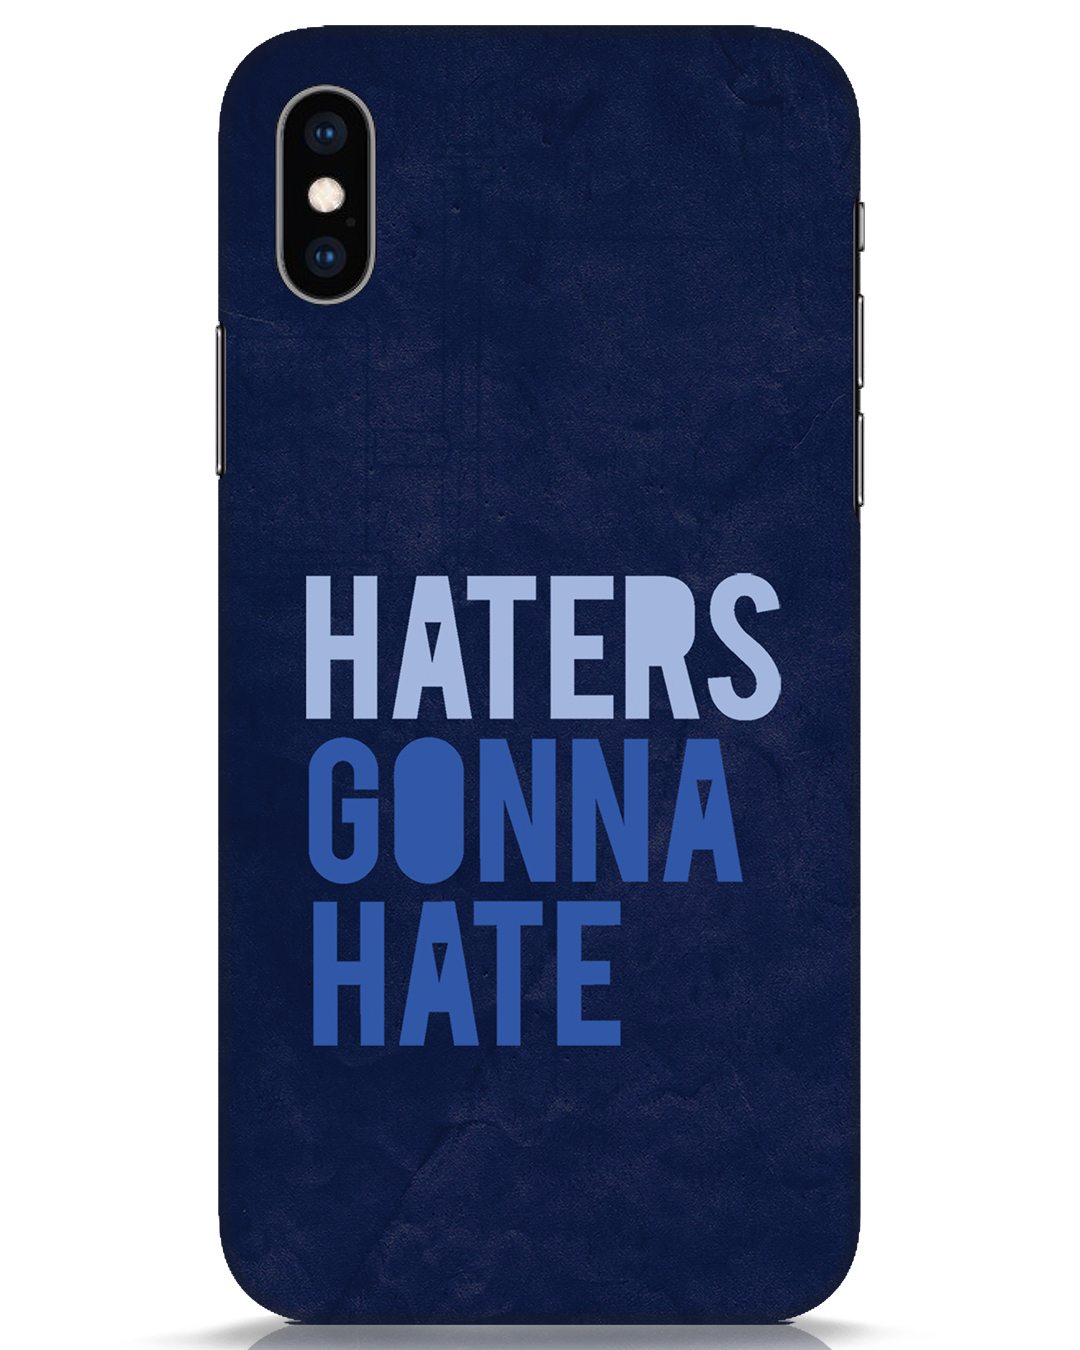 Buy Haters Gonna Hate iPhone XS Mobile Cover for Unisex Online at Bewakoof